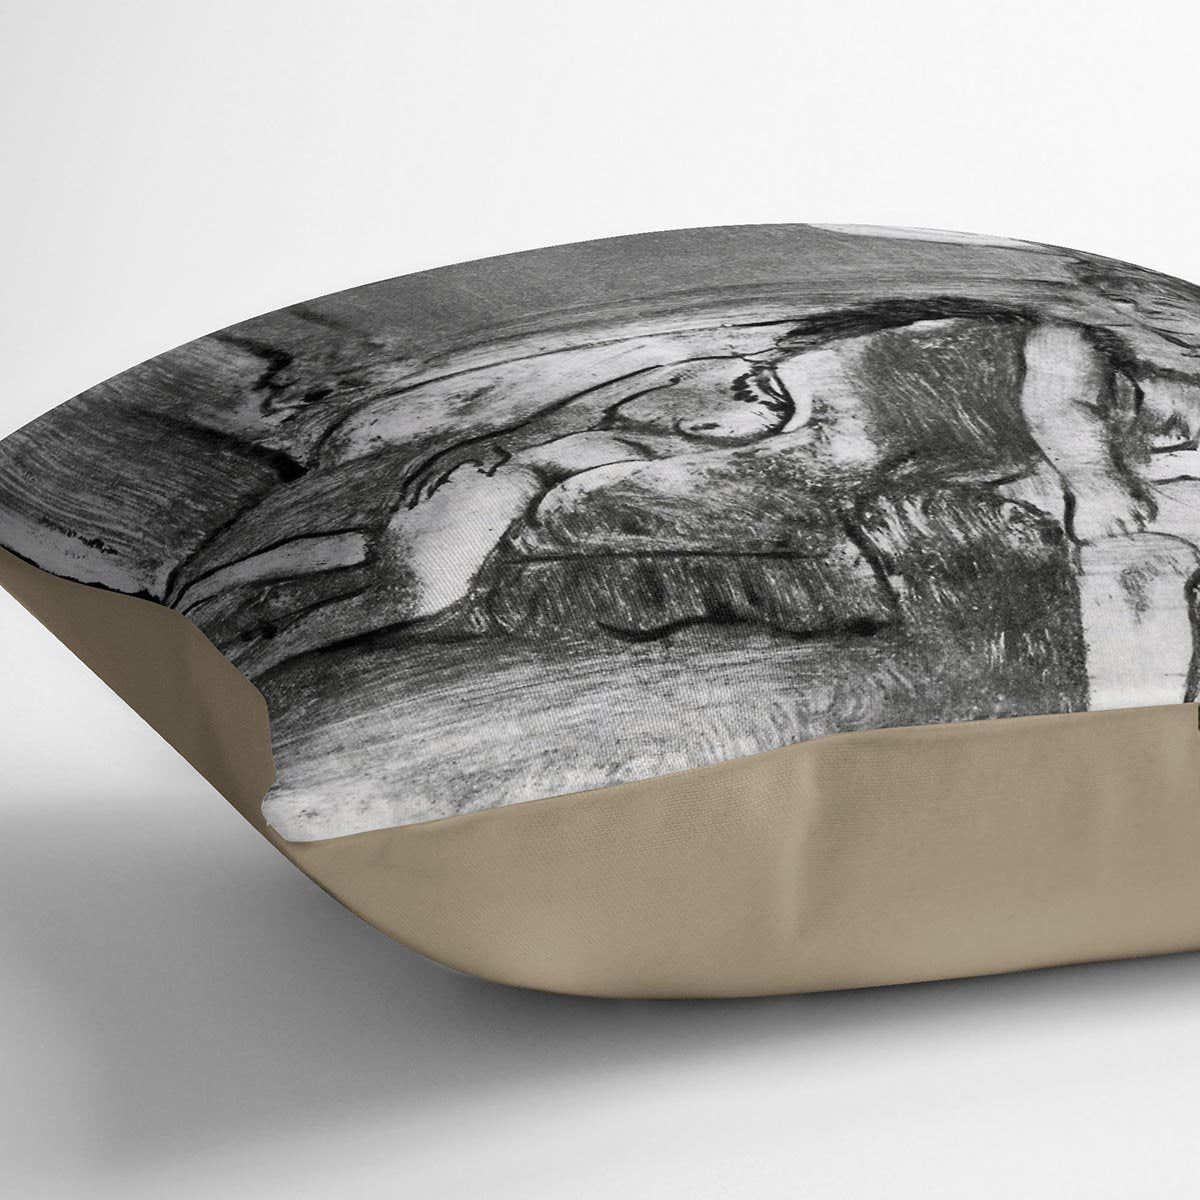 Taking a rest by Degas Cushion